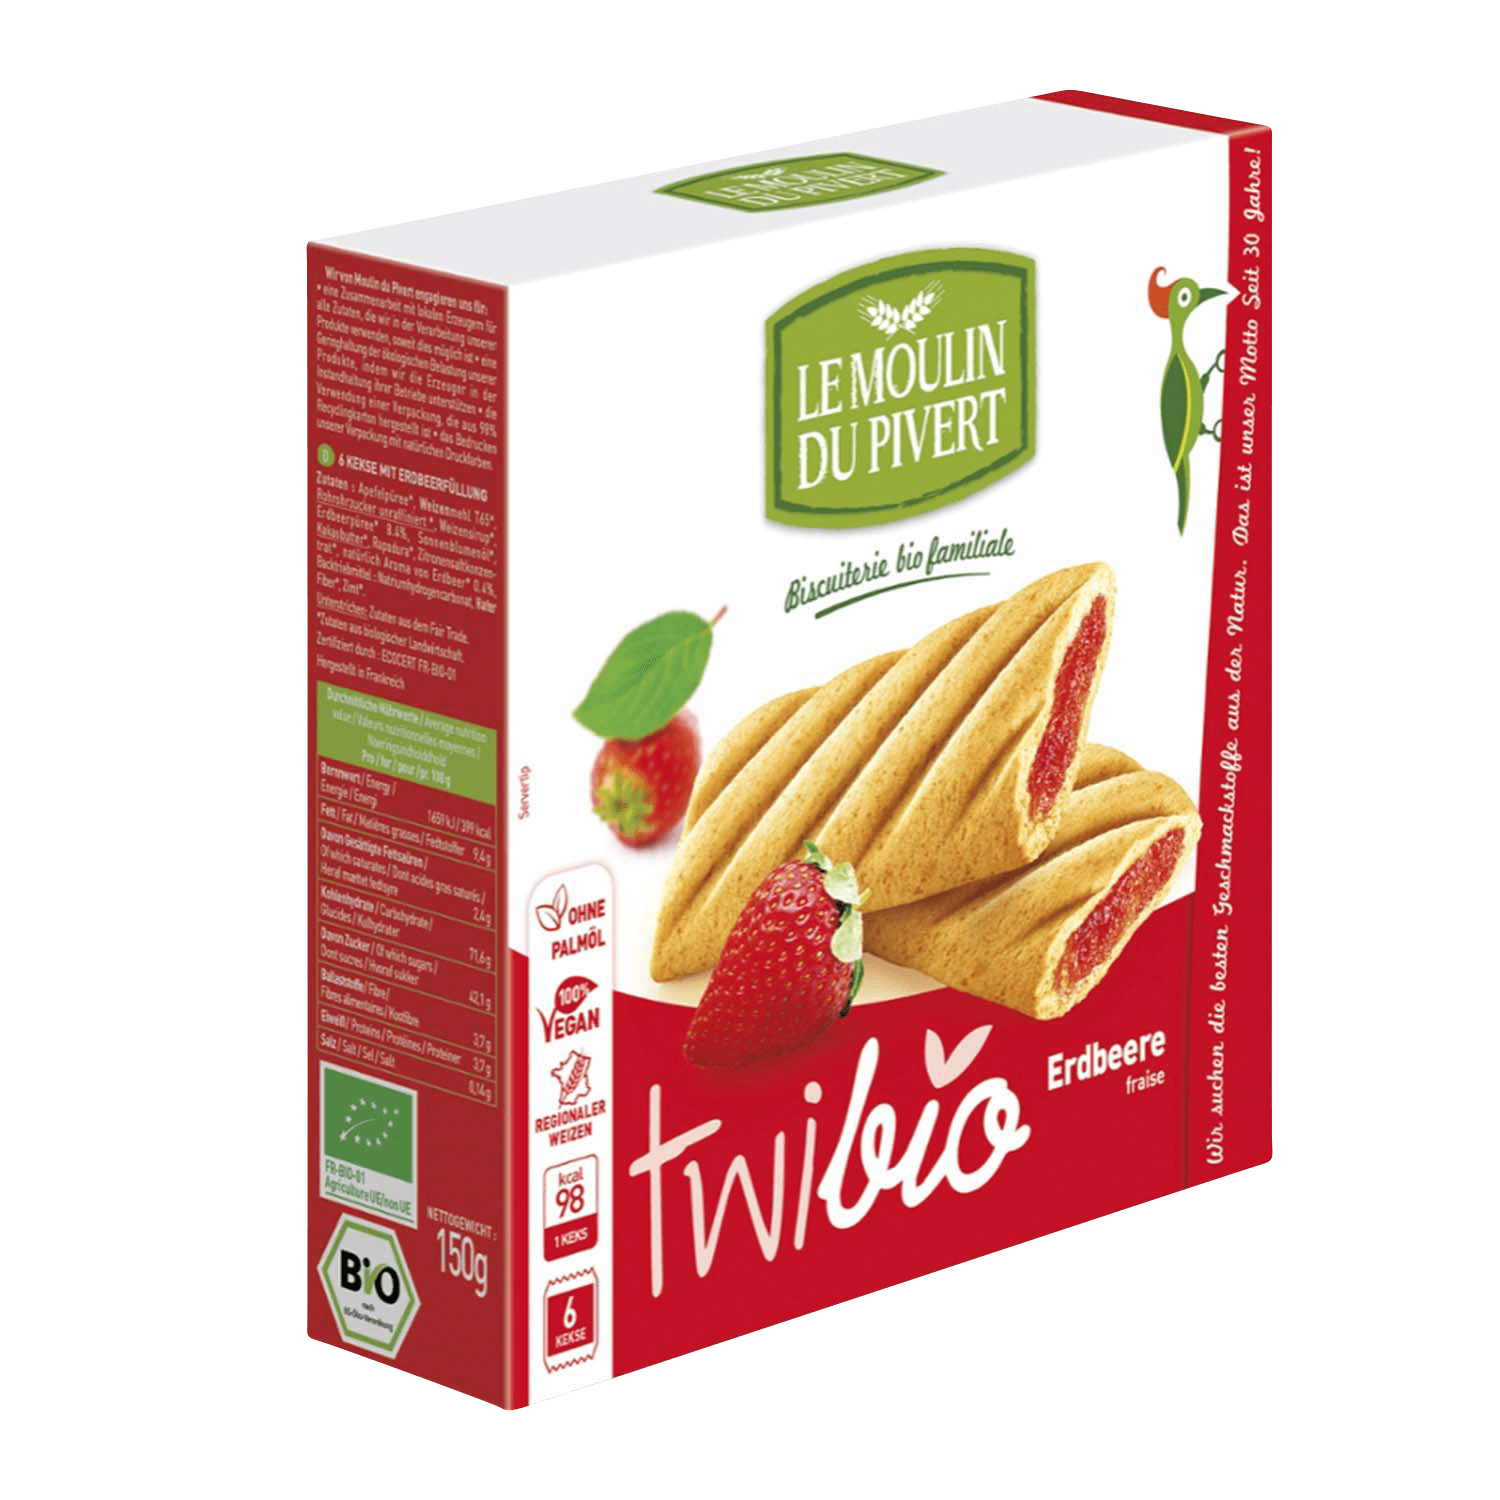 Twibio Biscuits With Strawberry Filling, Organic, 150g